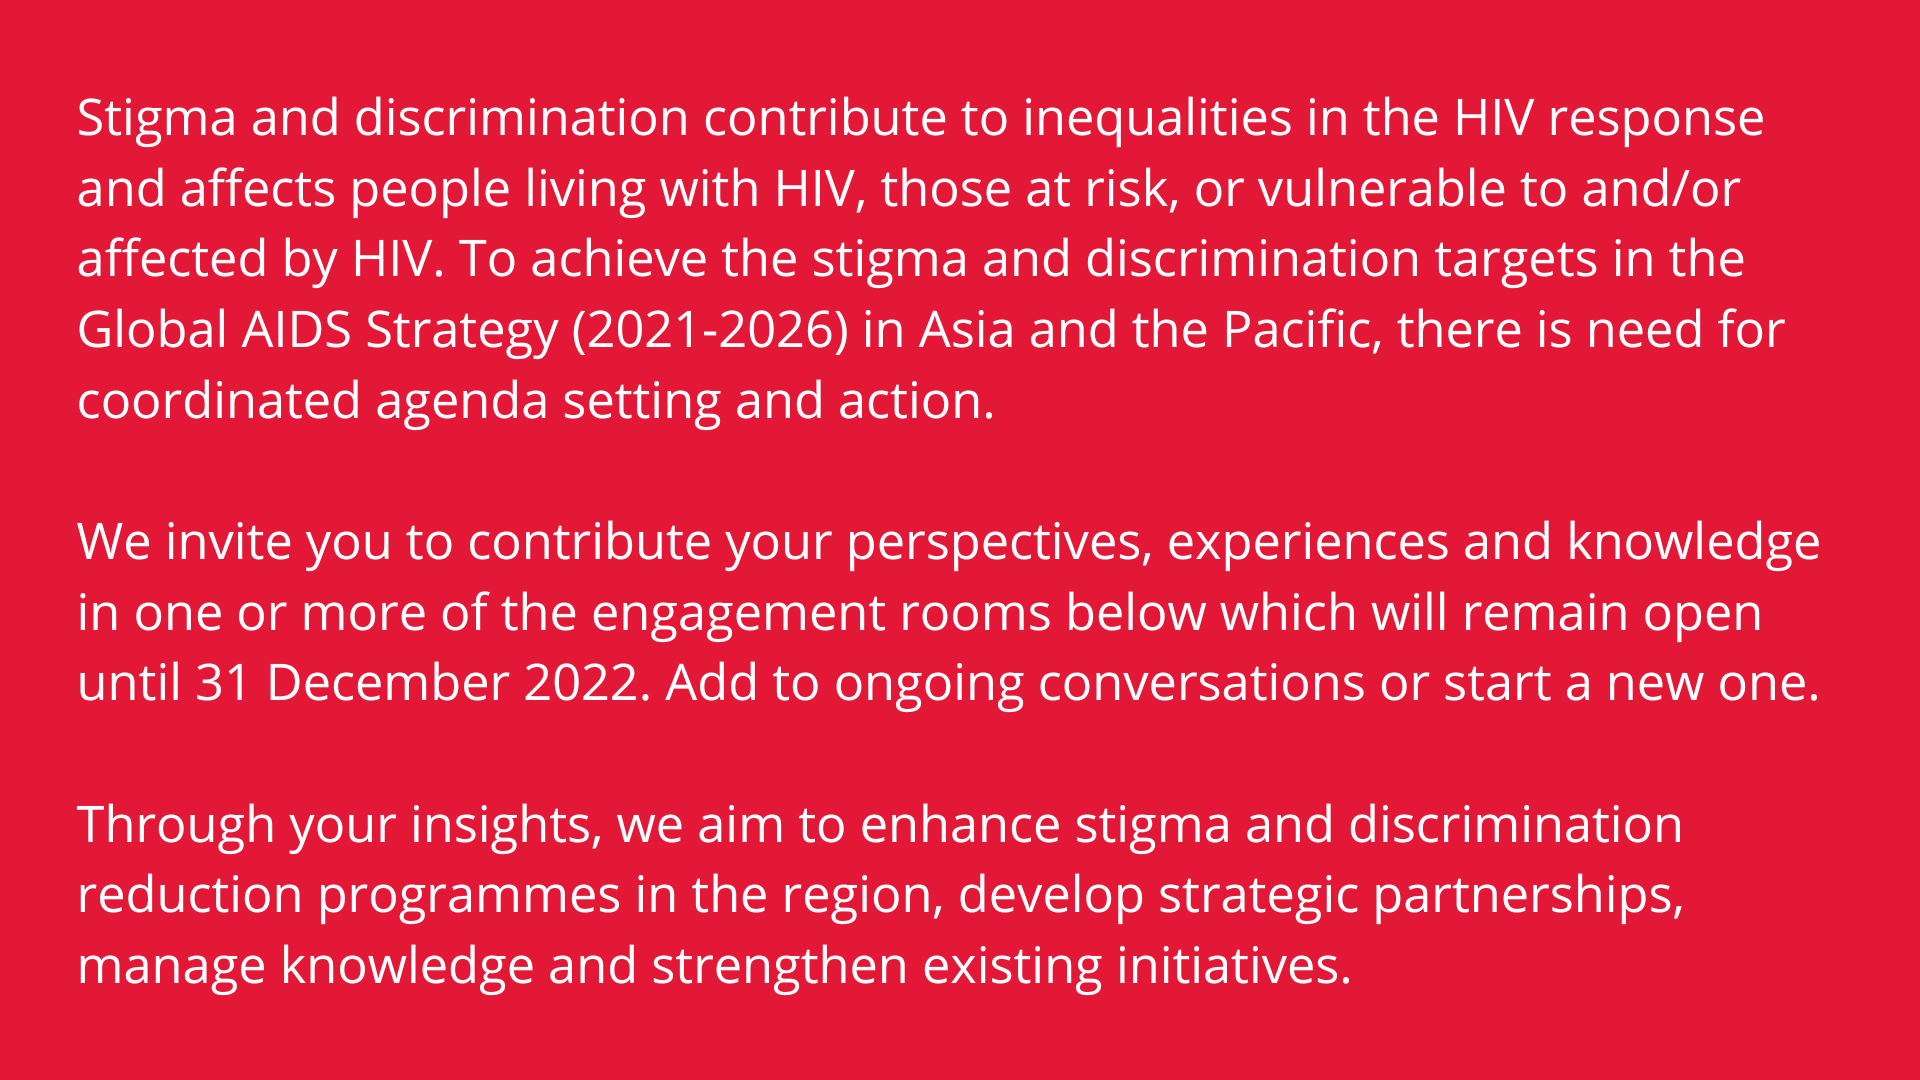 Stigma and discrimination contribute to inequalities in the HIV response and affects people living with HIV, those at risk, or vulnerable to and/or affected by HIV. To achieve the stigma and discrimination targets in the Global AIDS Strategy (2021-2026) in Asia and the Pacific, there is need for coordinated agenda setting and action.     We invite you to contribute your perspectives, experiences and knowledge in one or more of the engagement rooms below which will remain open until 31 December 2022. Add to ongoing conversations or start a new one.     Through your insights, we aim to enhance stigma and discrimination reduction programmes in the region, develop strategic partnerships, manage knowledge and strengthen existing initiatives.